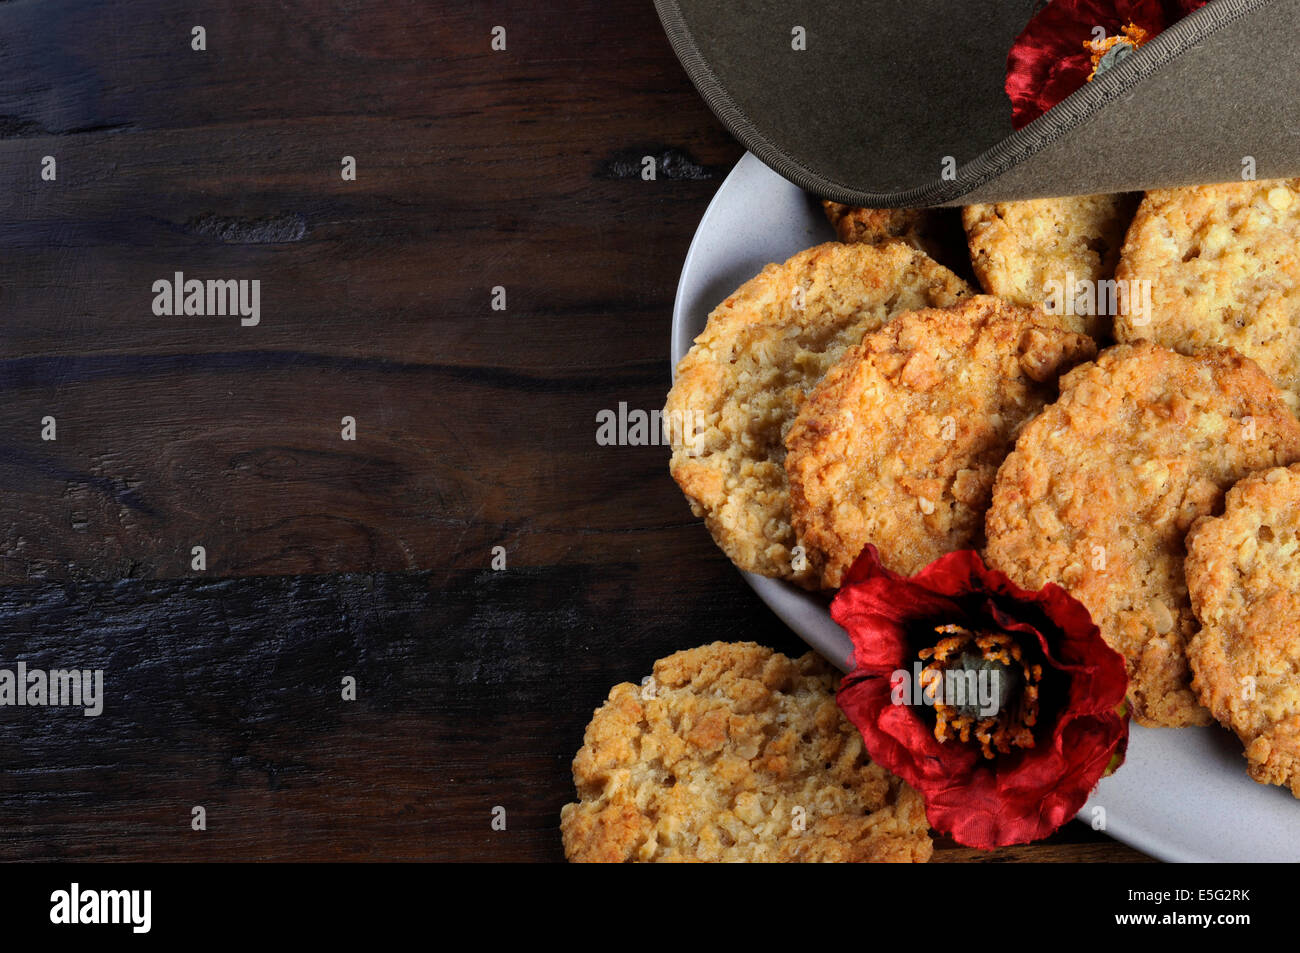 Australian army slouch hat and traditional Anzac biscuits on dark recycled wood with remembrance red poppy. Stock Photo